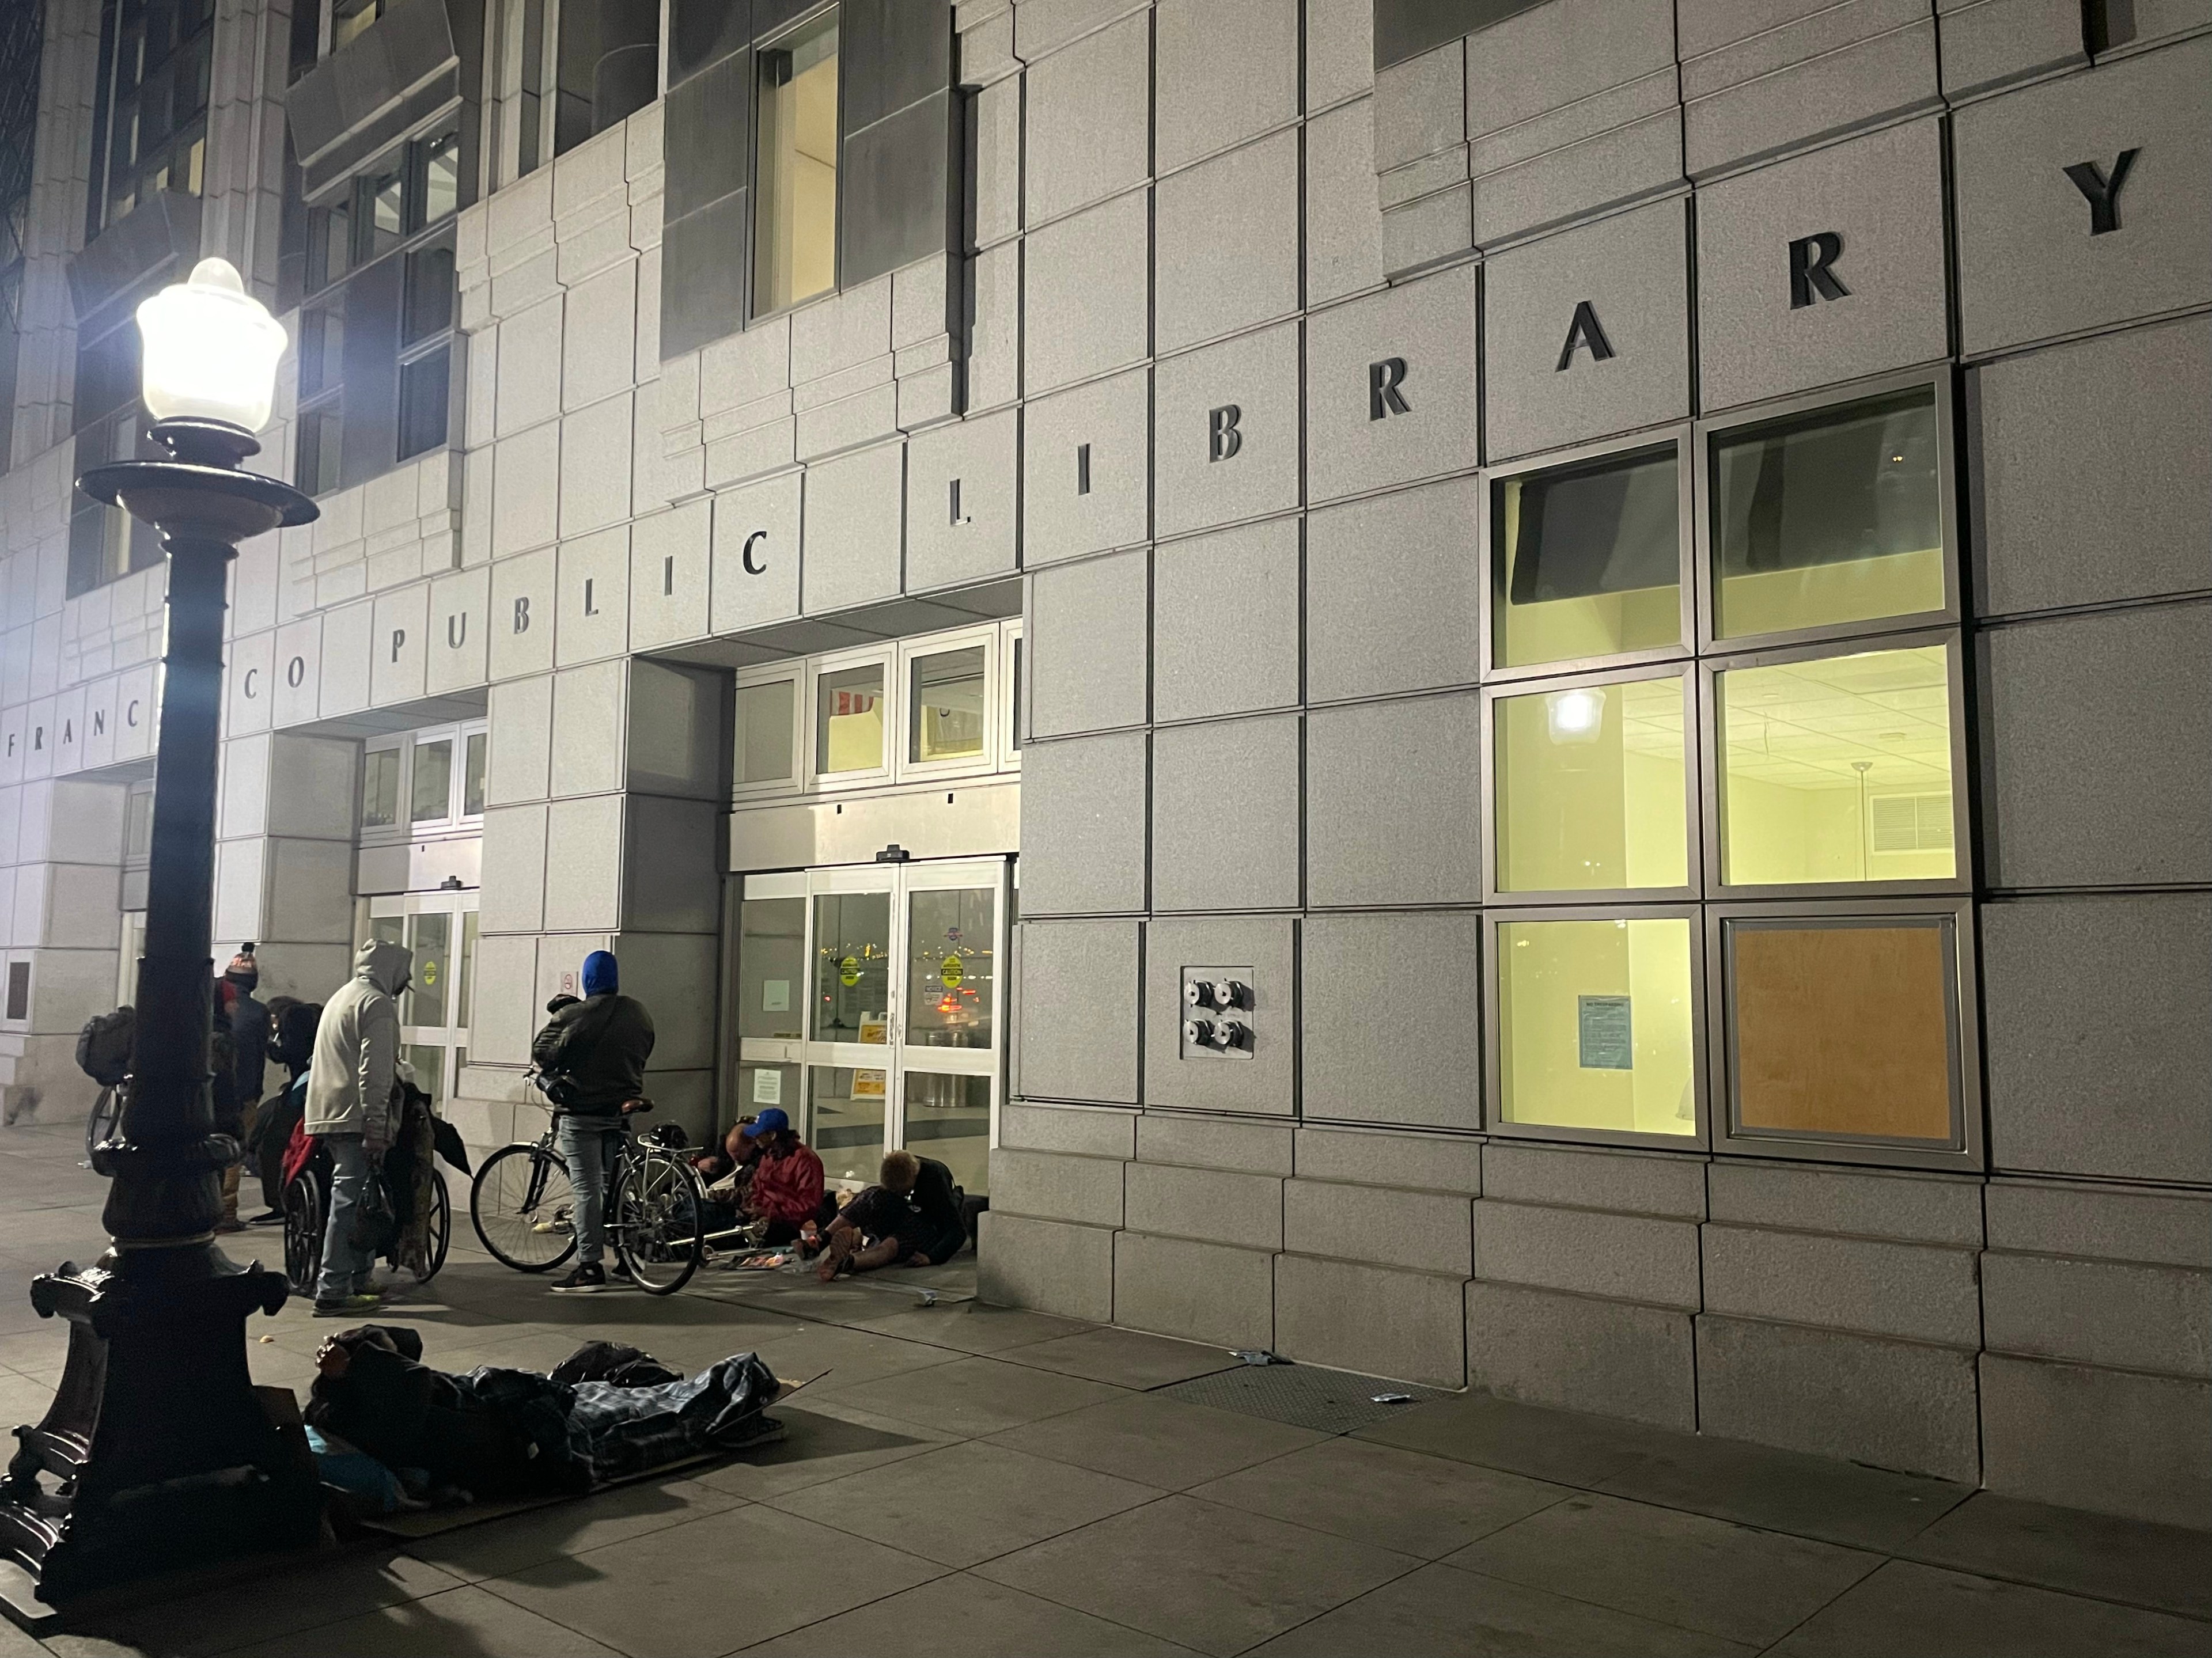 Outside a public library at night, with people gathered by the entrance and others lying on the pavement.